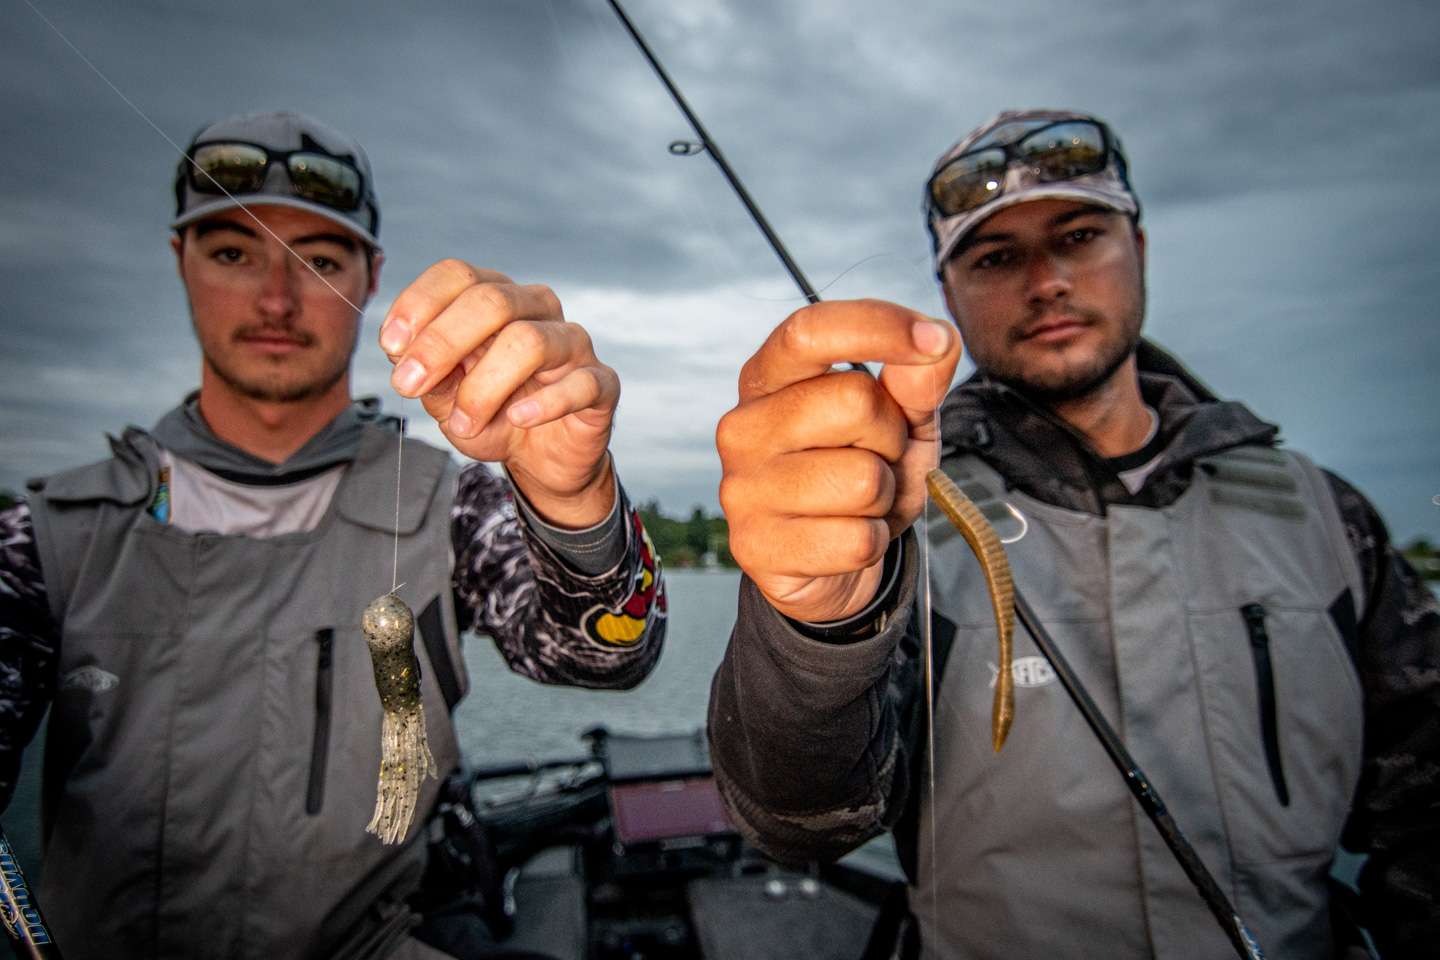 The champs relied on a drop shot with a 5/8-ounce weight, paired with a Berkley Powerbait Maxscent Flat Worm. Scott mixed in a Poor Boy's Baits Tube rigged on a 3/4-ounce Bite Me Tackle Tube Head. 